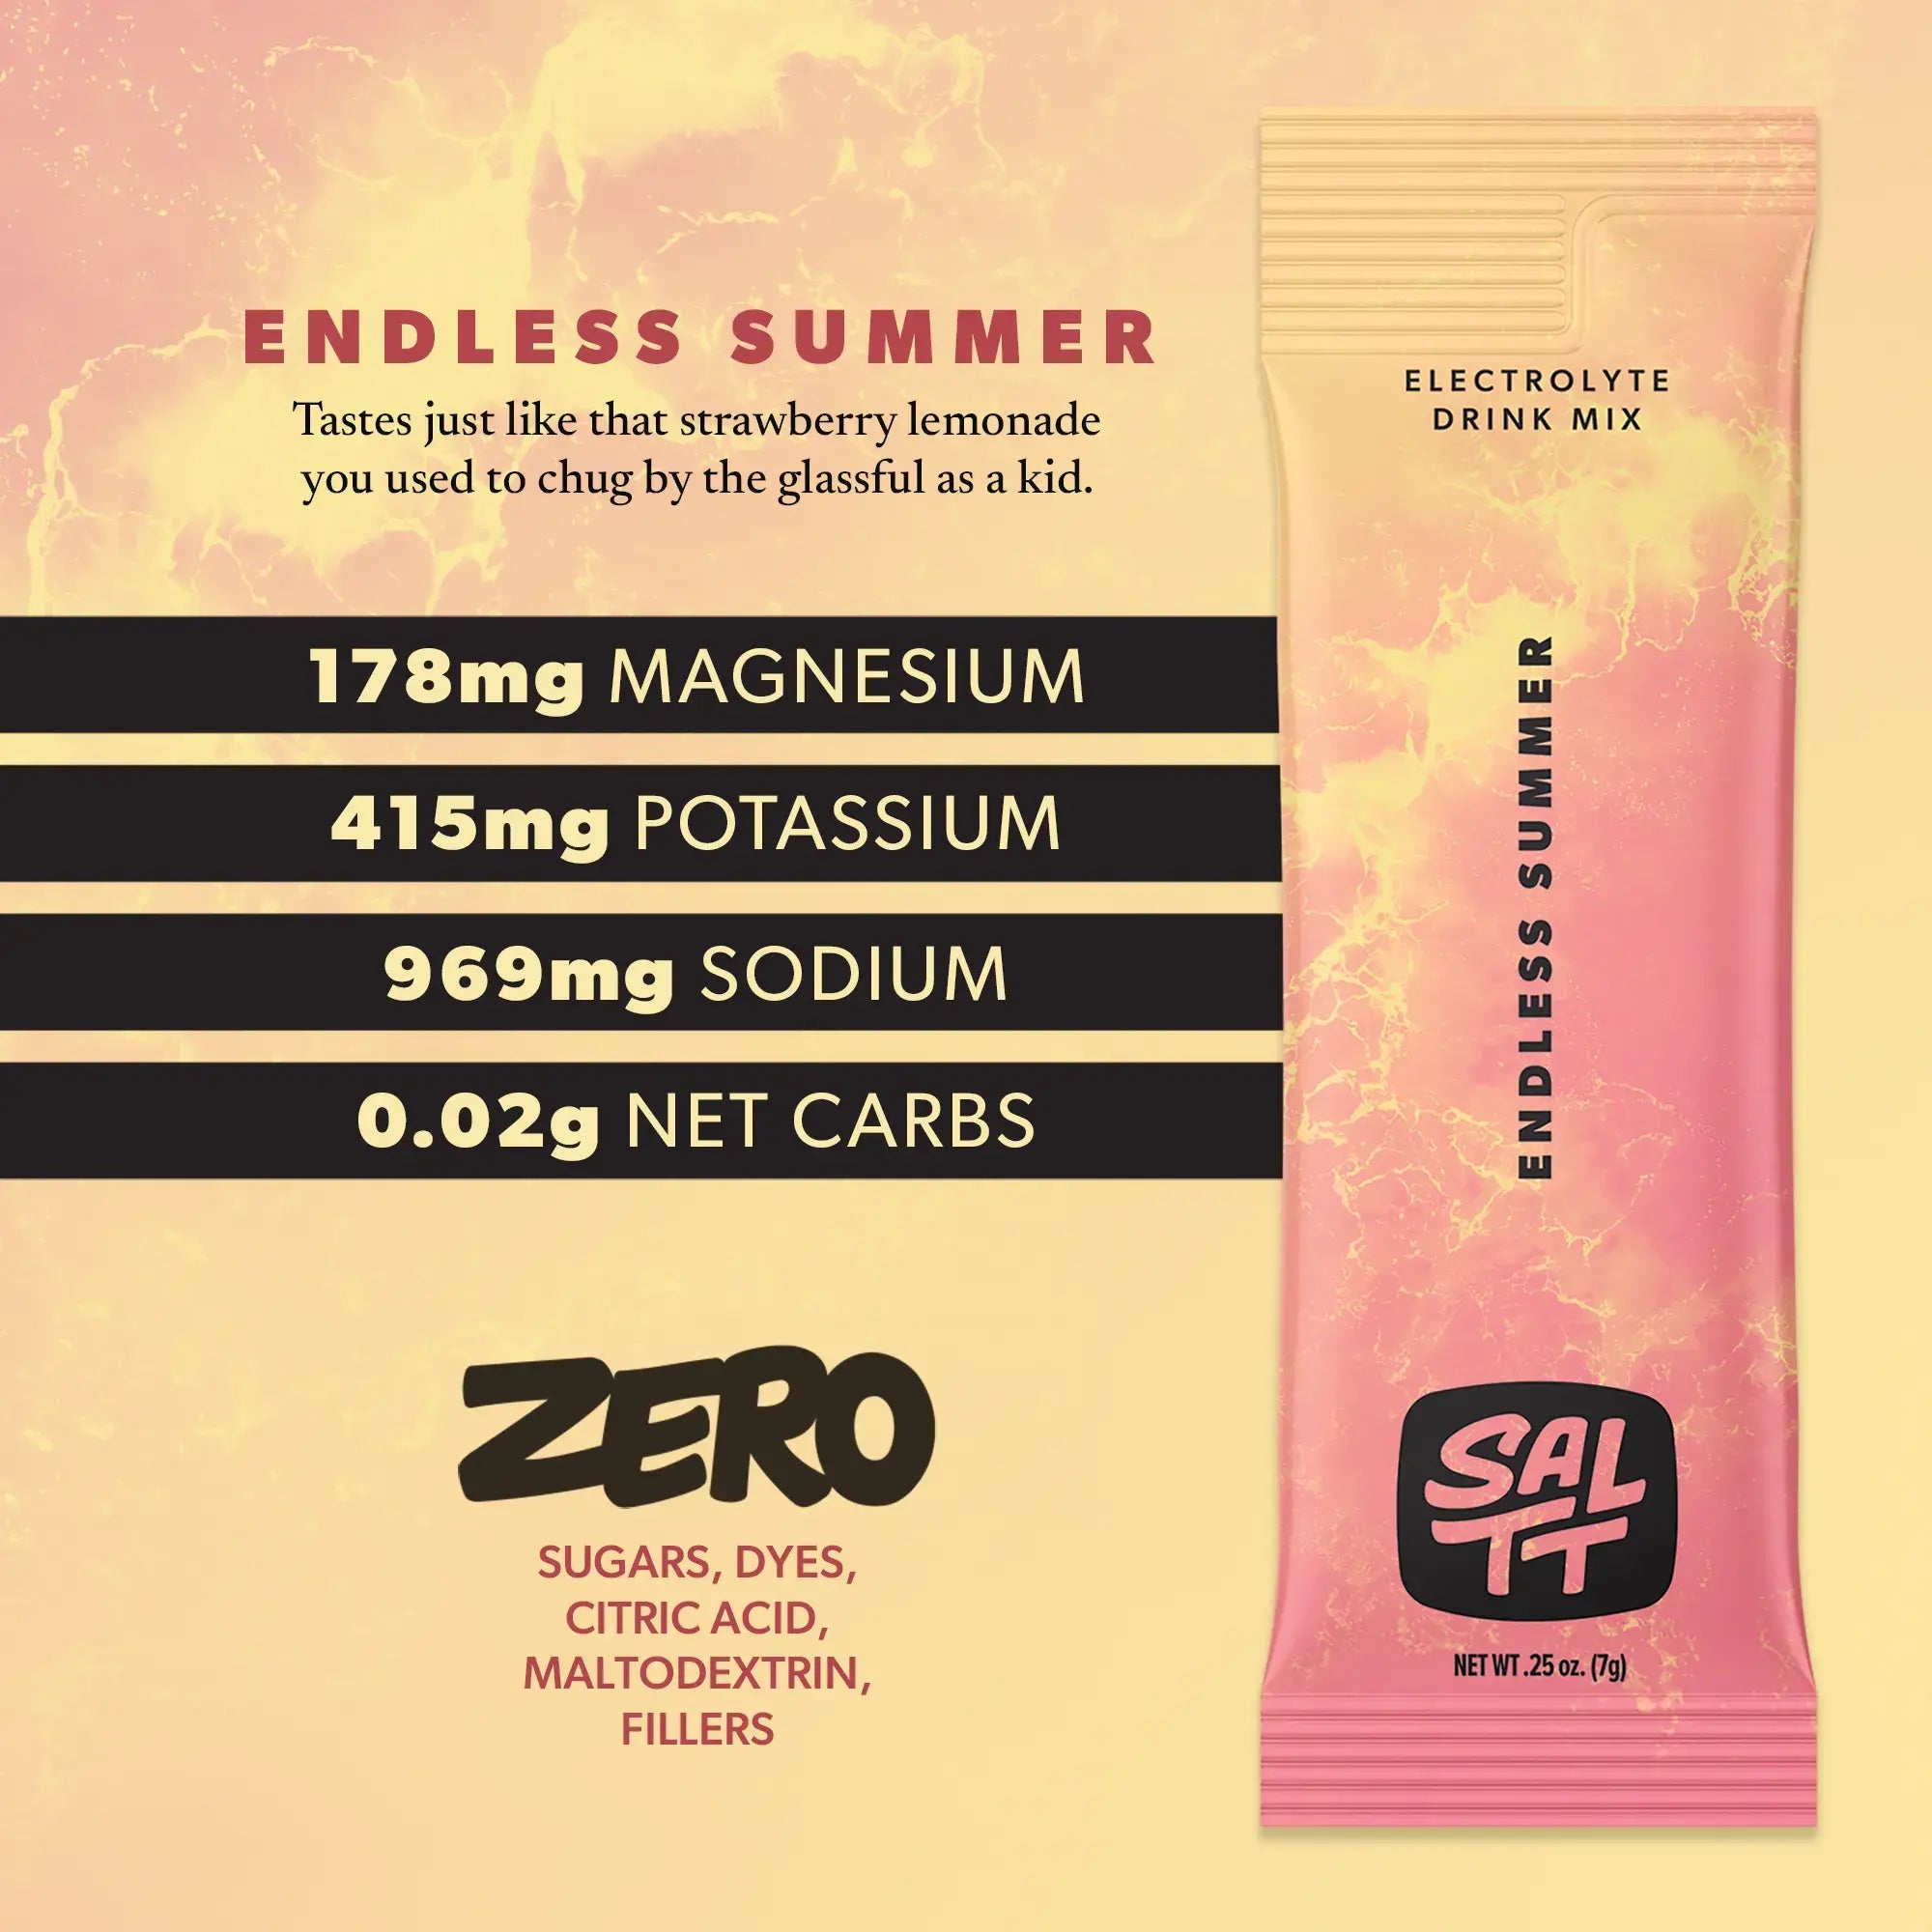 Nutrition for Endless Summer flavor. Endless Summer has 178mg Magnesium, 415mg Potassium, 969mg Sodium, 0.02g net carbs. Zero sugars, dyes, citric acid, maltodextrin, or fillers. See nutrition dropdown for complete supplement facts.